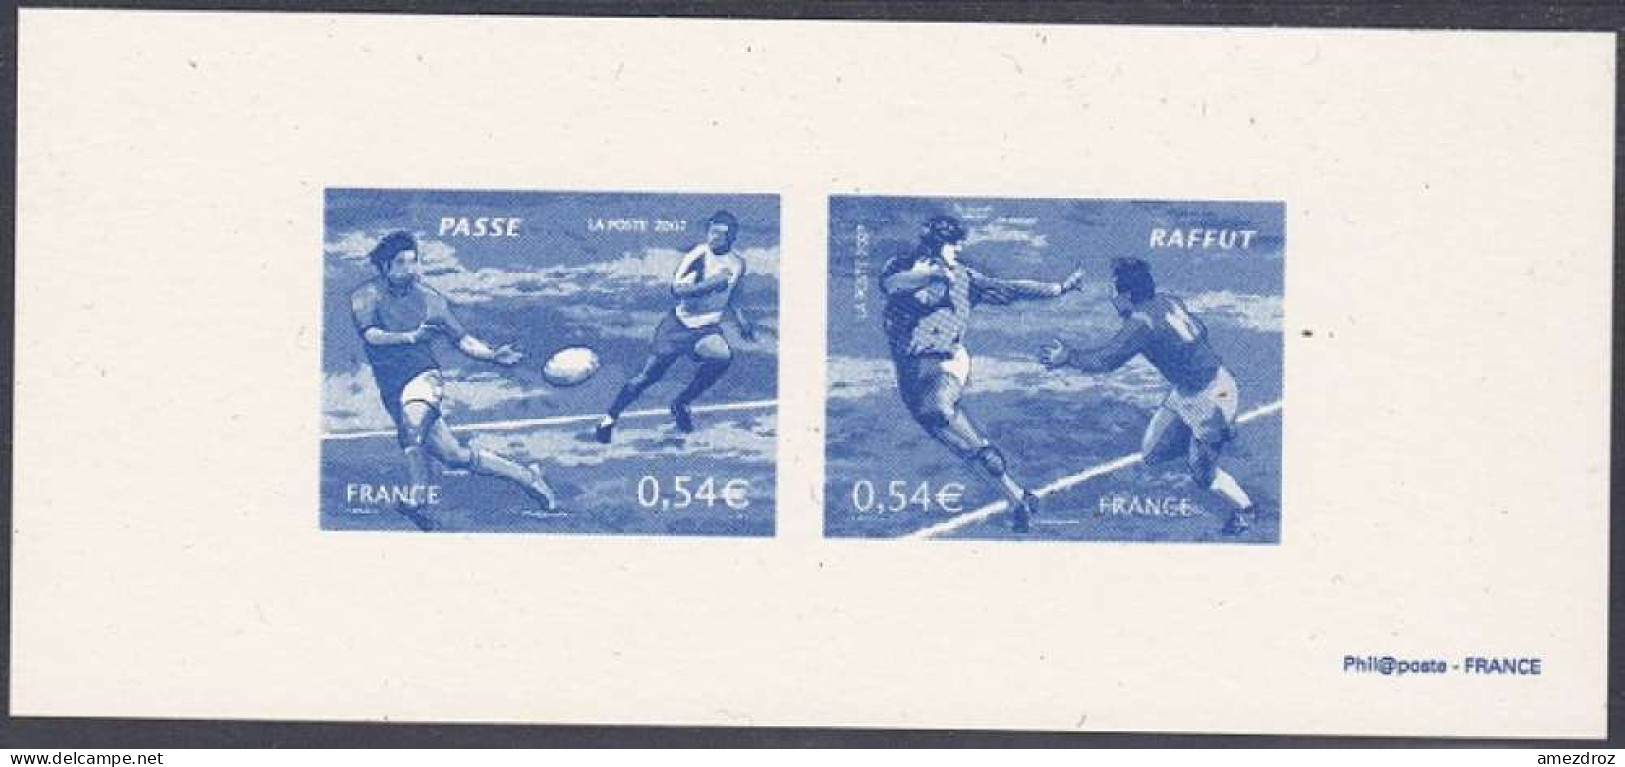 France Gravure Officielle Rugby (3) - Documents Of Postal Services